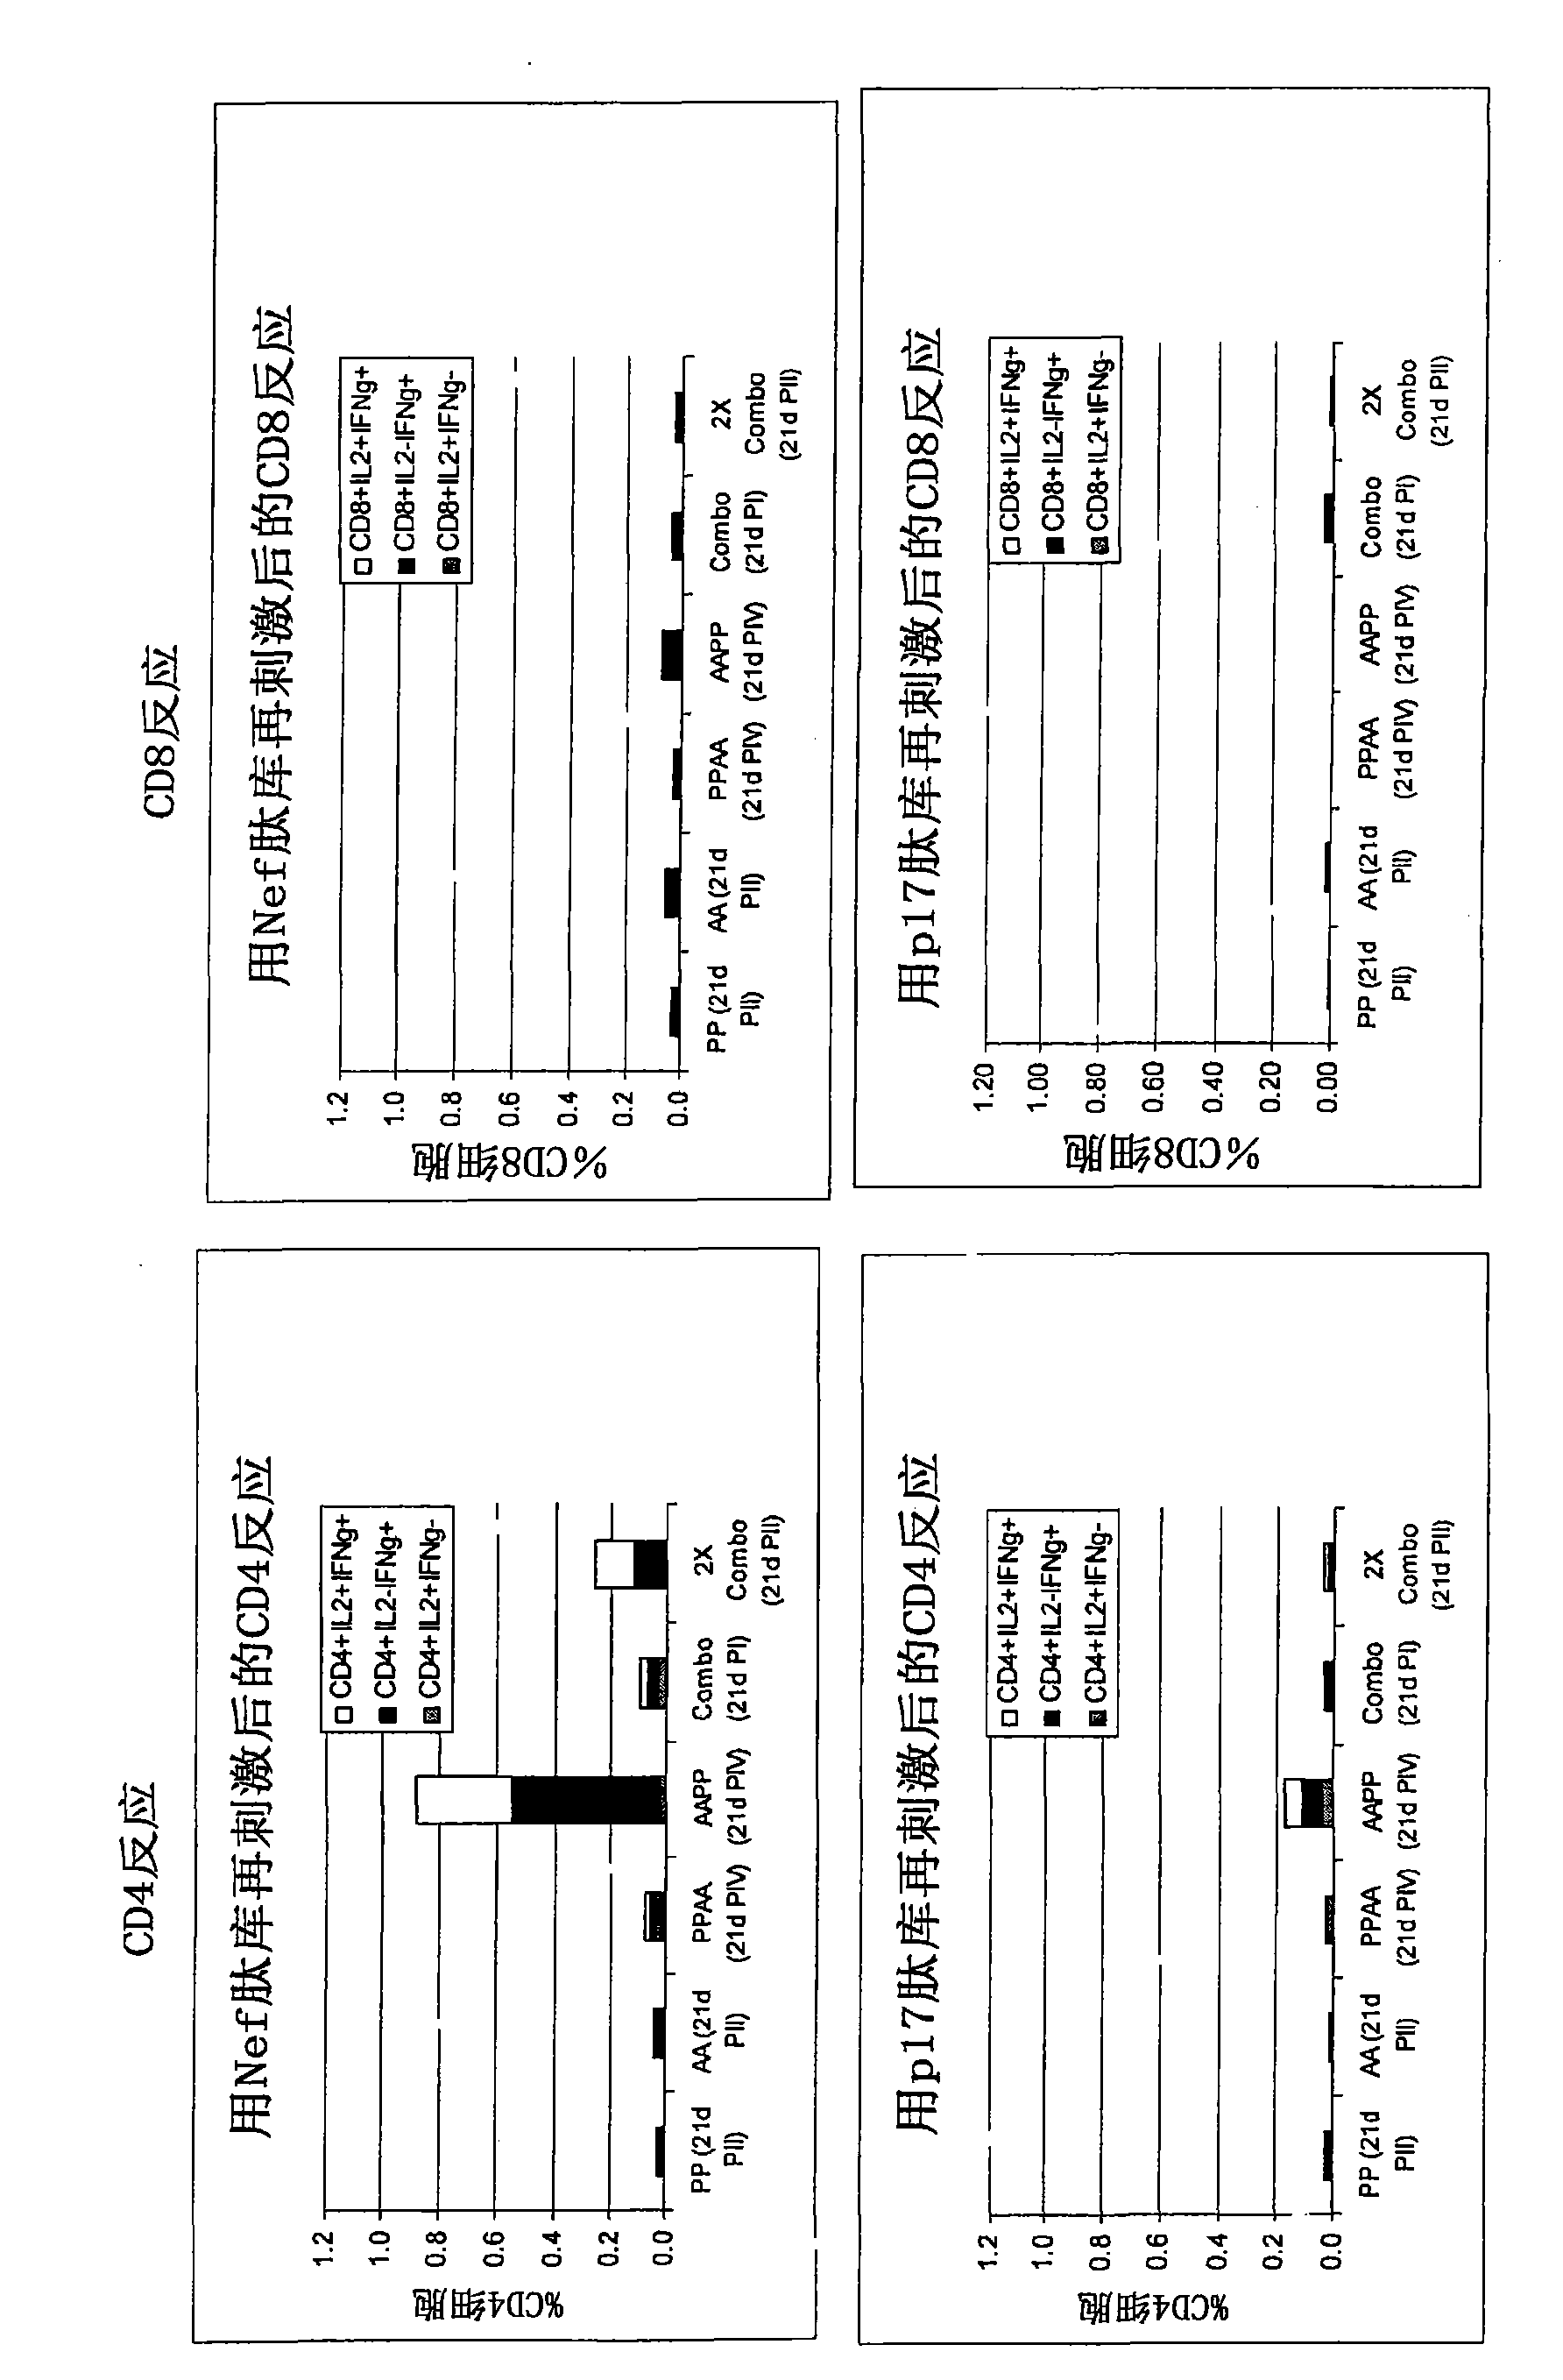 Novel method and compositions